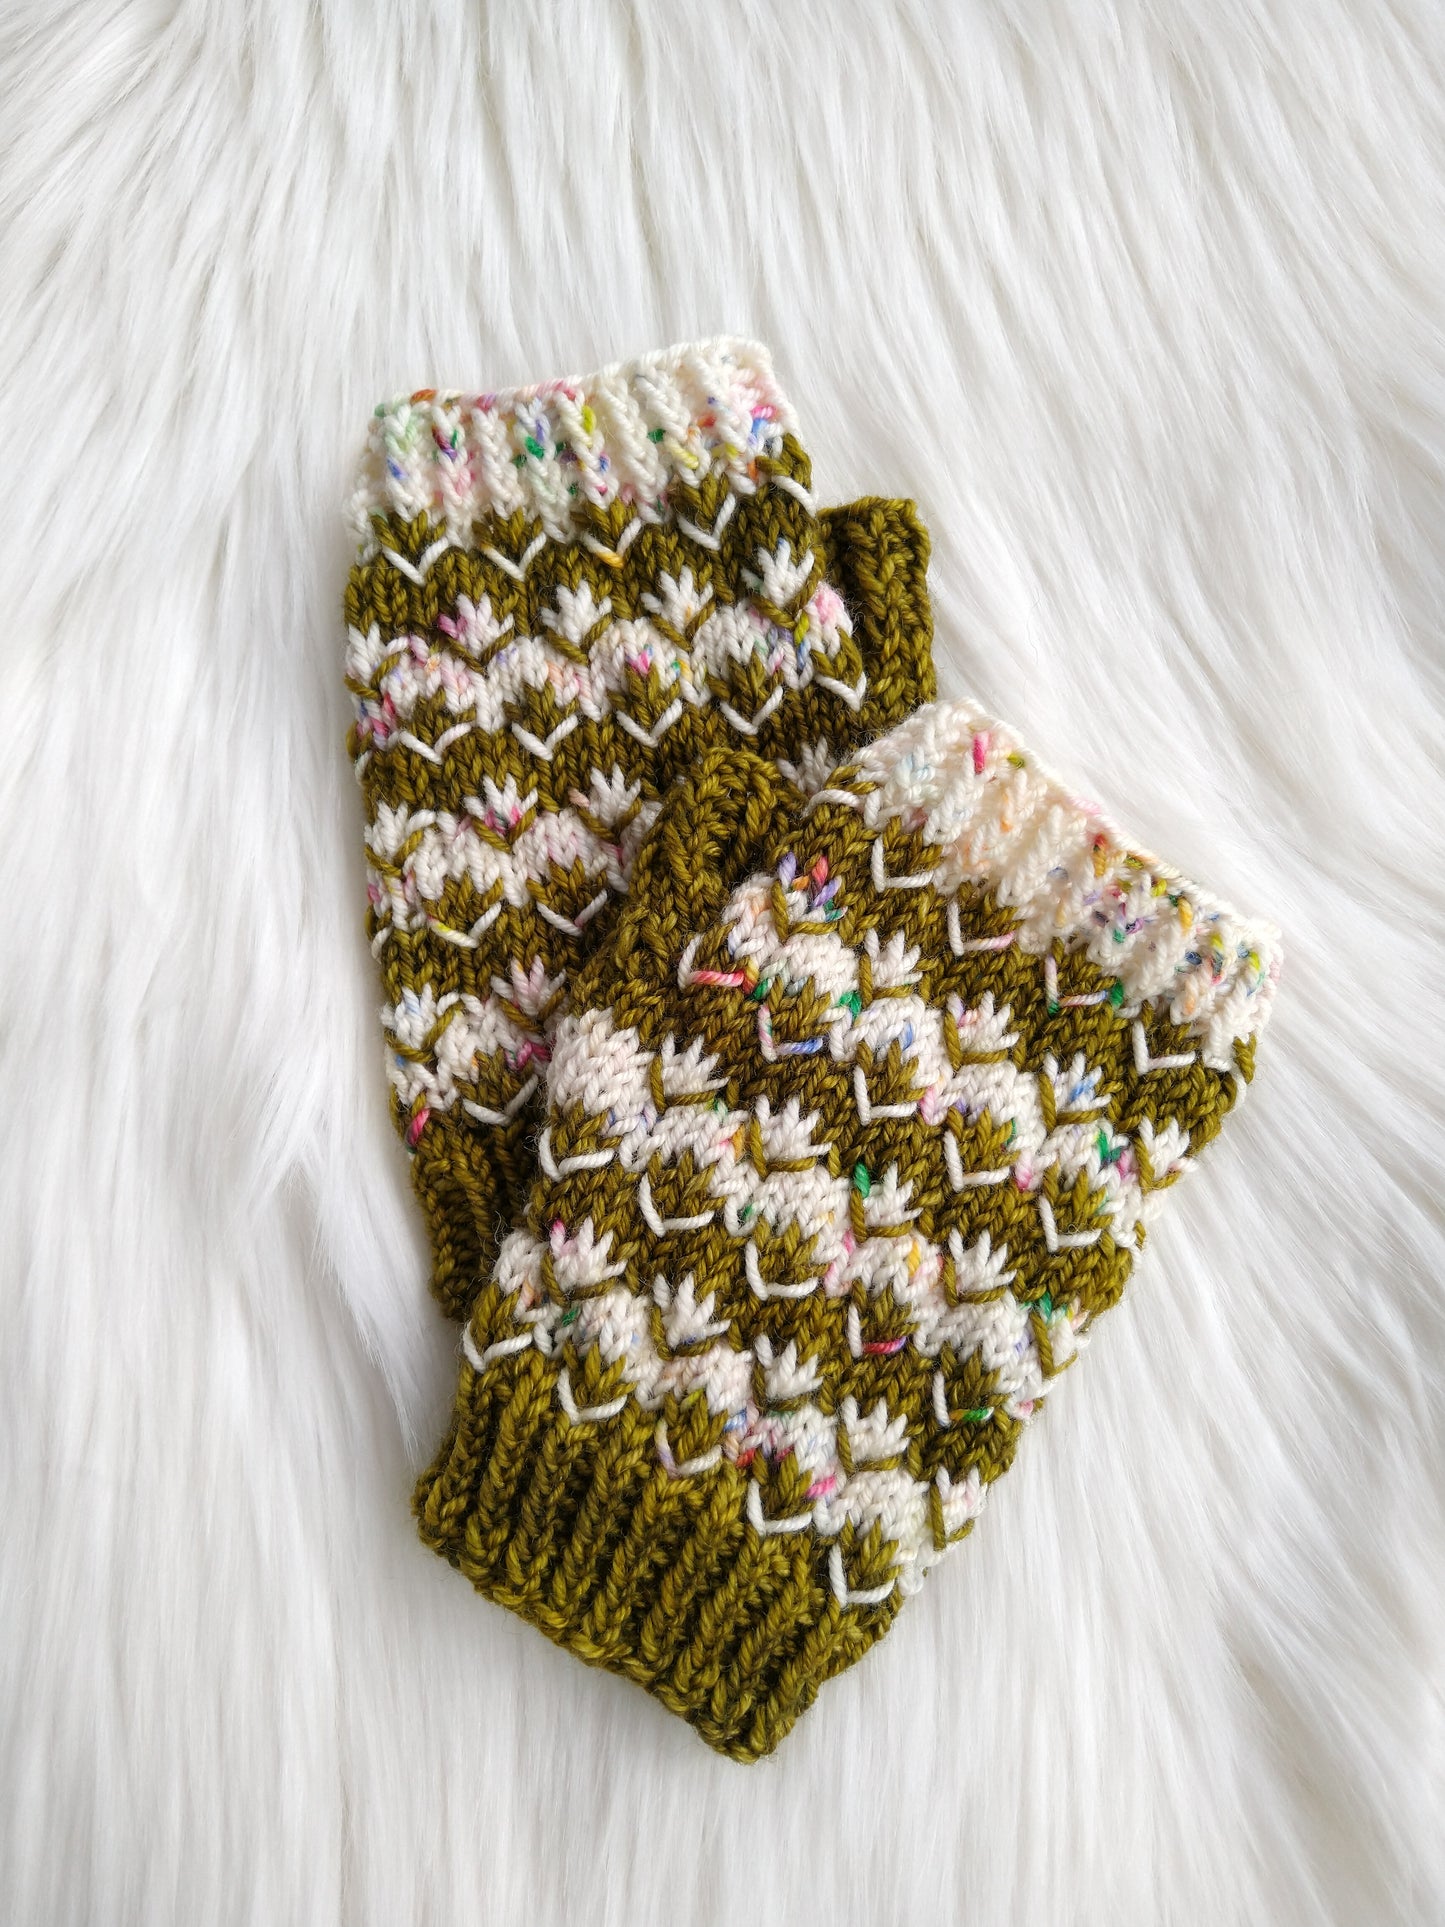 Pomona Mitts (worsted and light bulky) Knitting Pattern